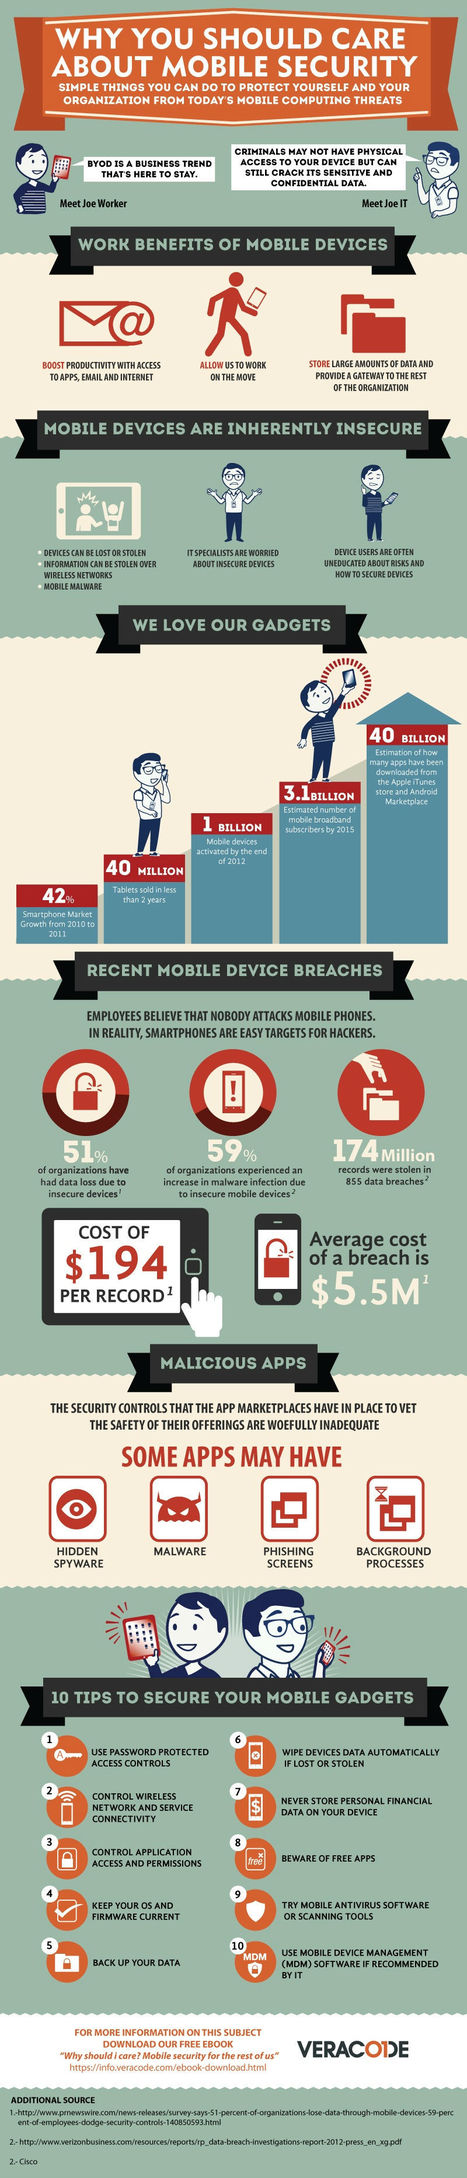 Why You Should Care About Mobile Security [INFOGRAPHIC] | Dyslexia, Literacy, and New-Media Literacy | Scoop.it